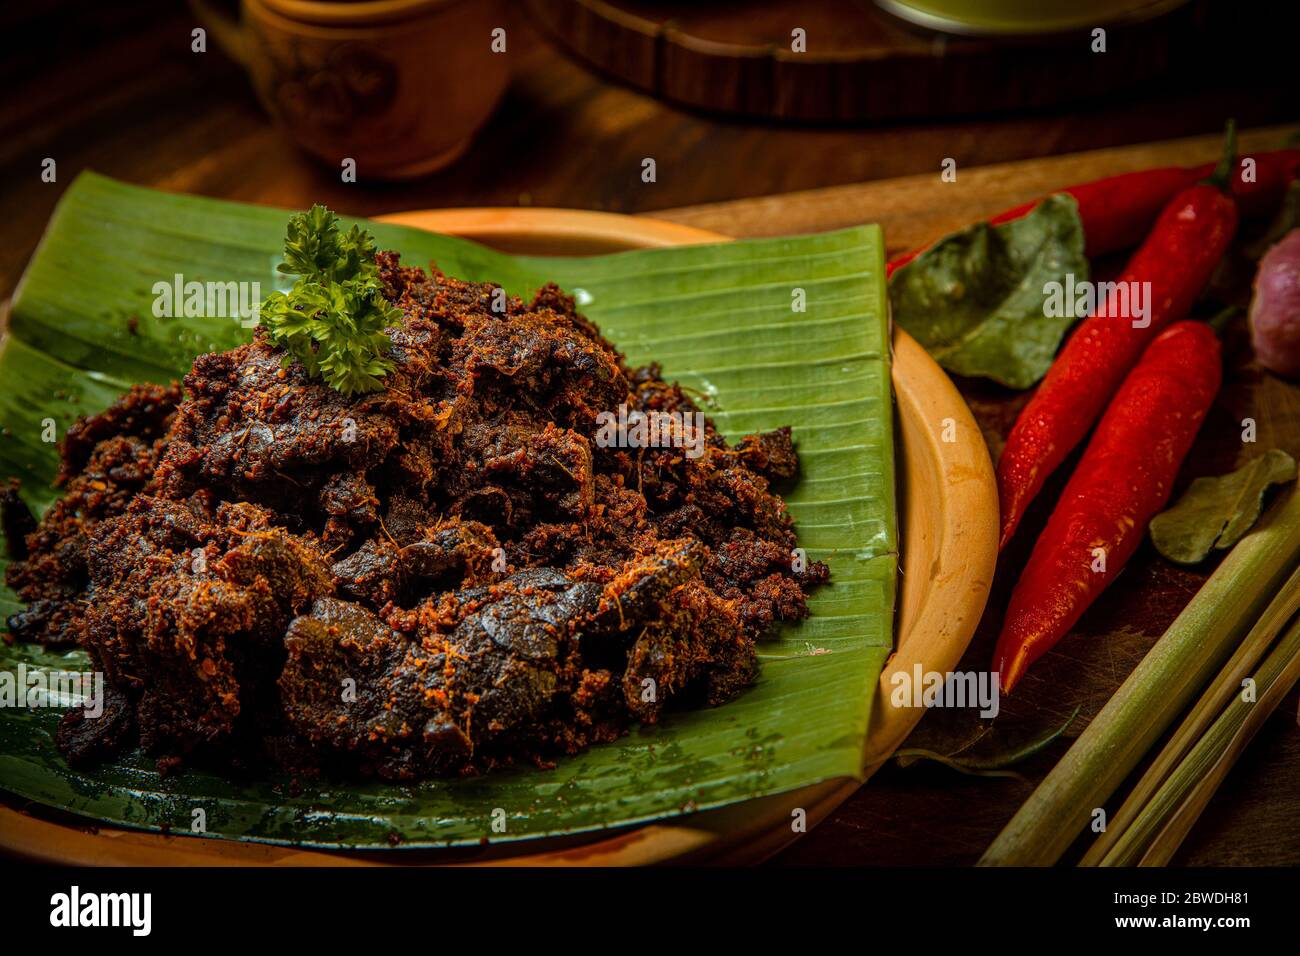 Rendang Paru or Spicy Beef Lung stew traditional food from Padang, Indonesia. The dish is arranged among the spices and herbs Stock Photo